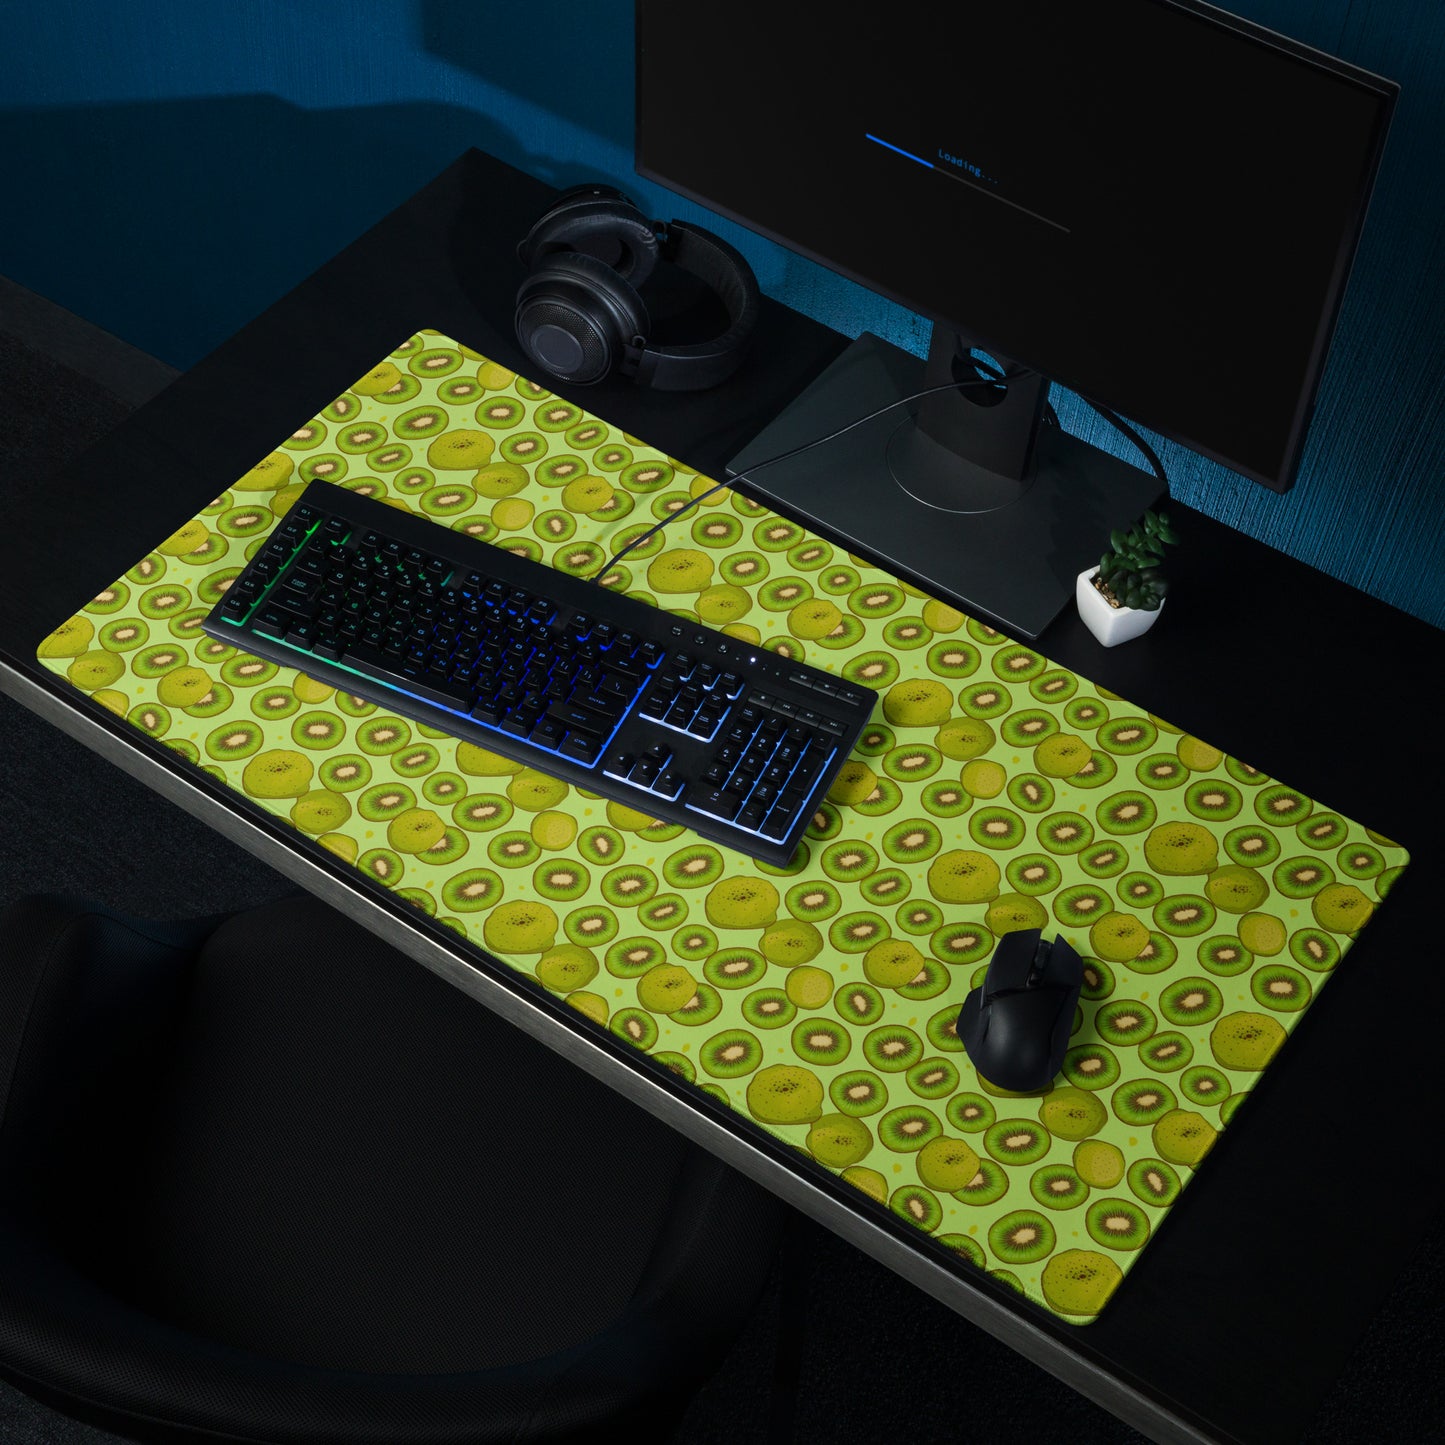 A 36" x 18" desk pad with Kiwis all over it shown on a desk setup. Green in color.